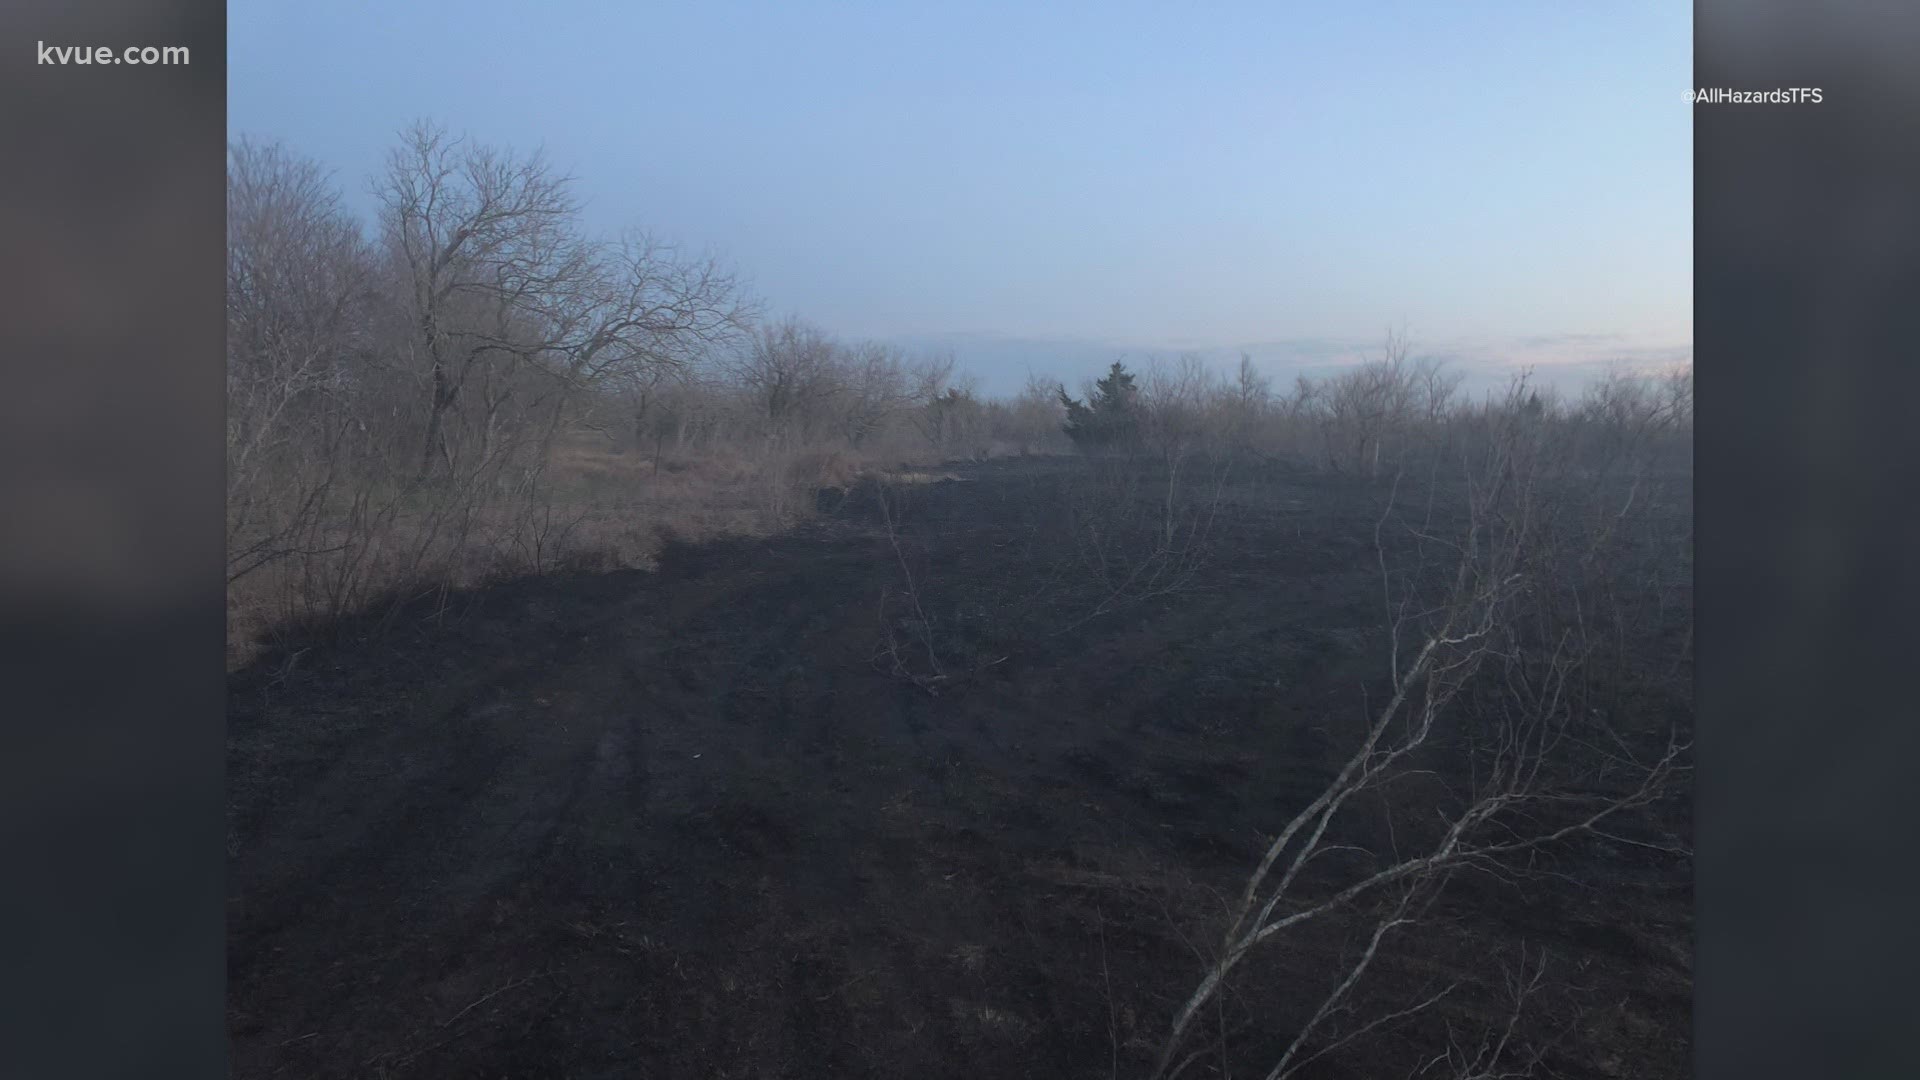 According to officials, crews first responded to the fire Sunday when it was five acres burning near Doyle Overton Road.